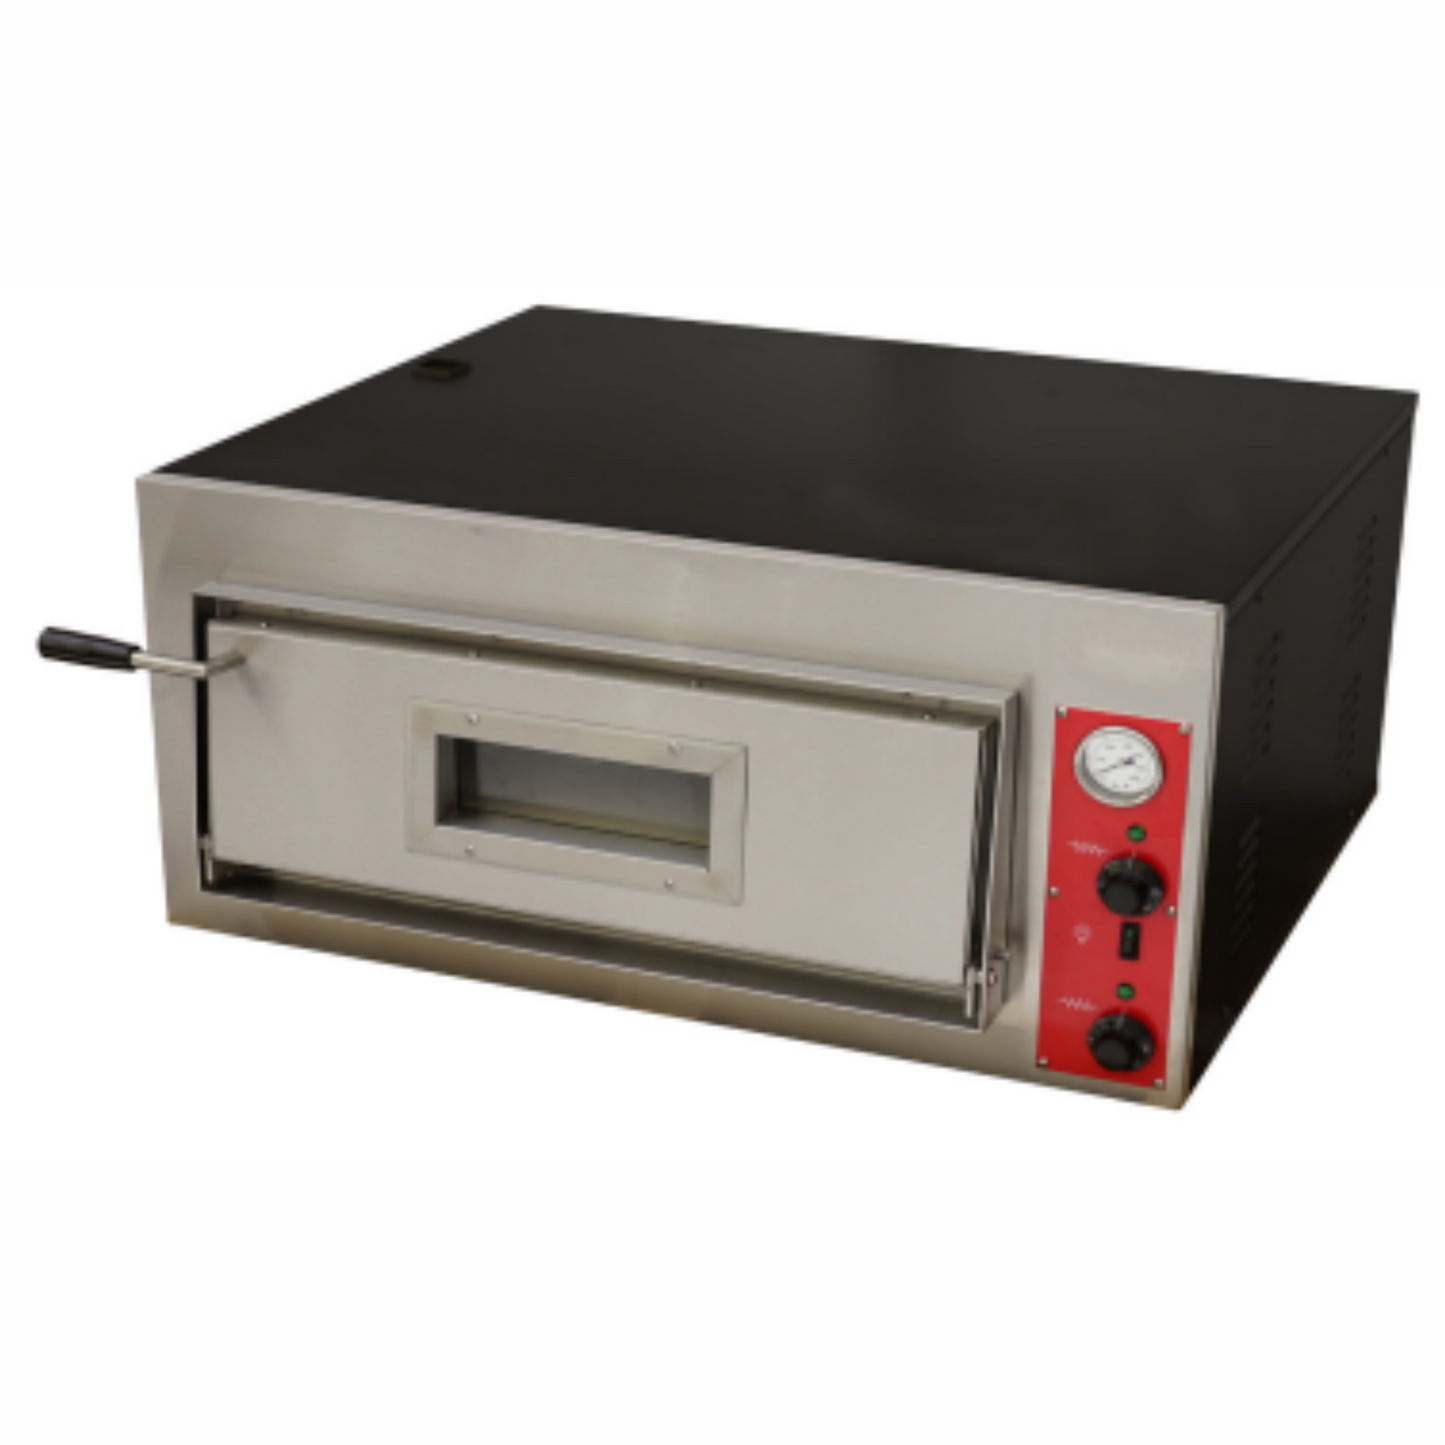 SDP61 Professional Pizza Oven